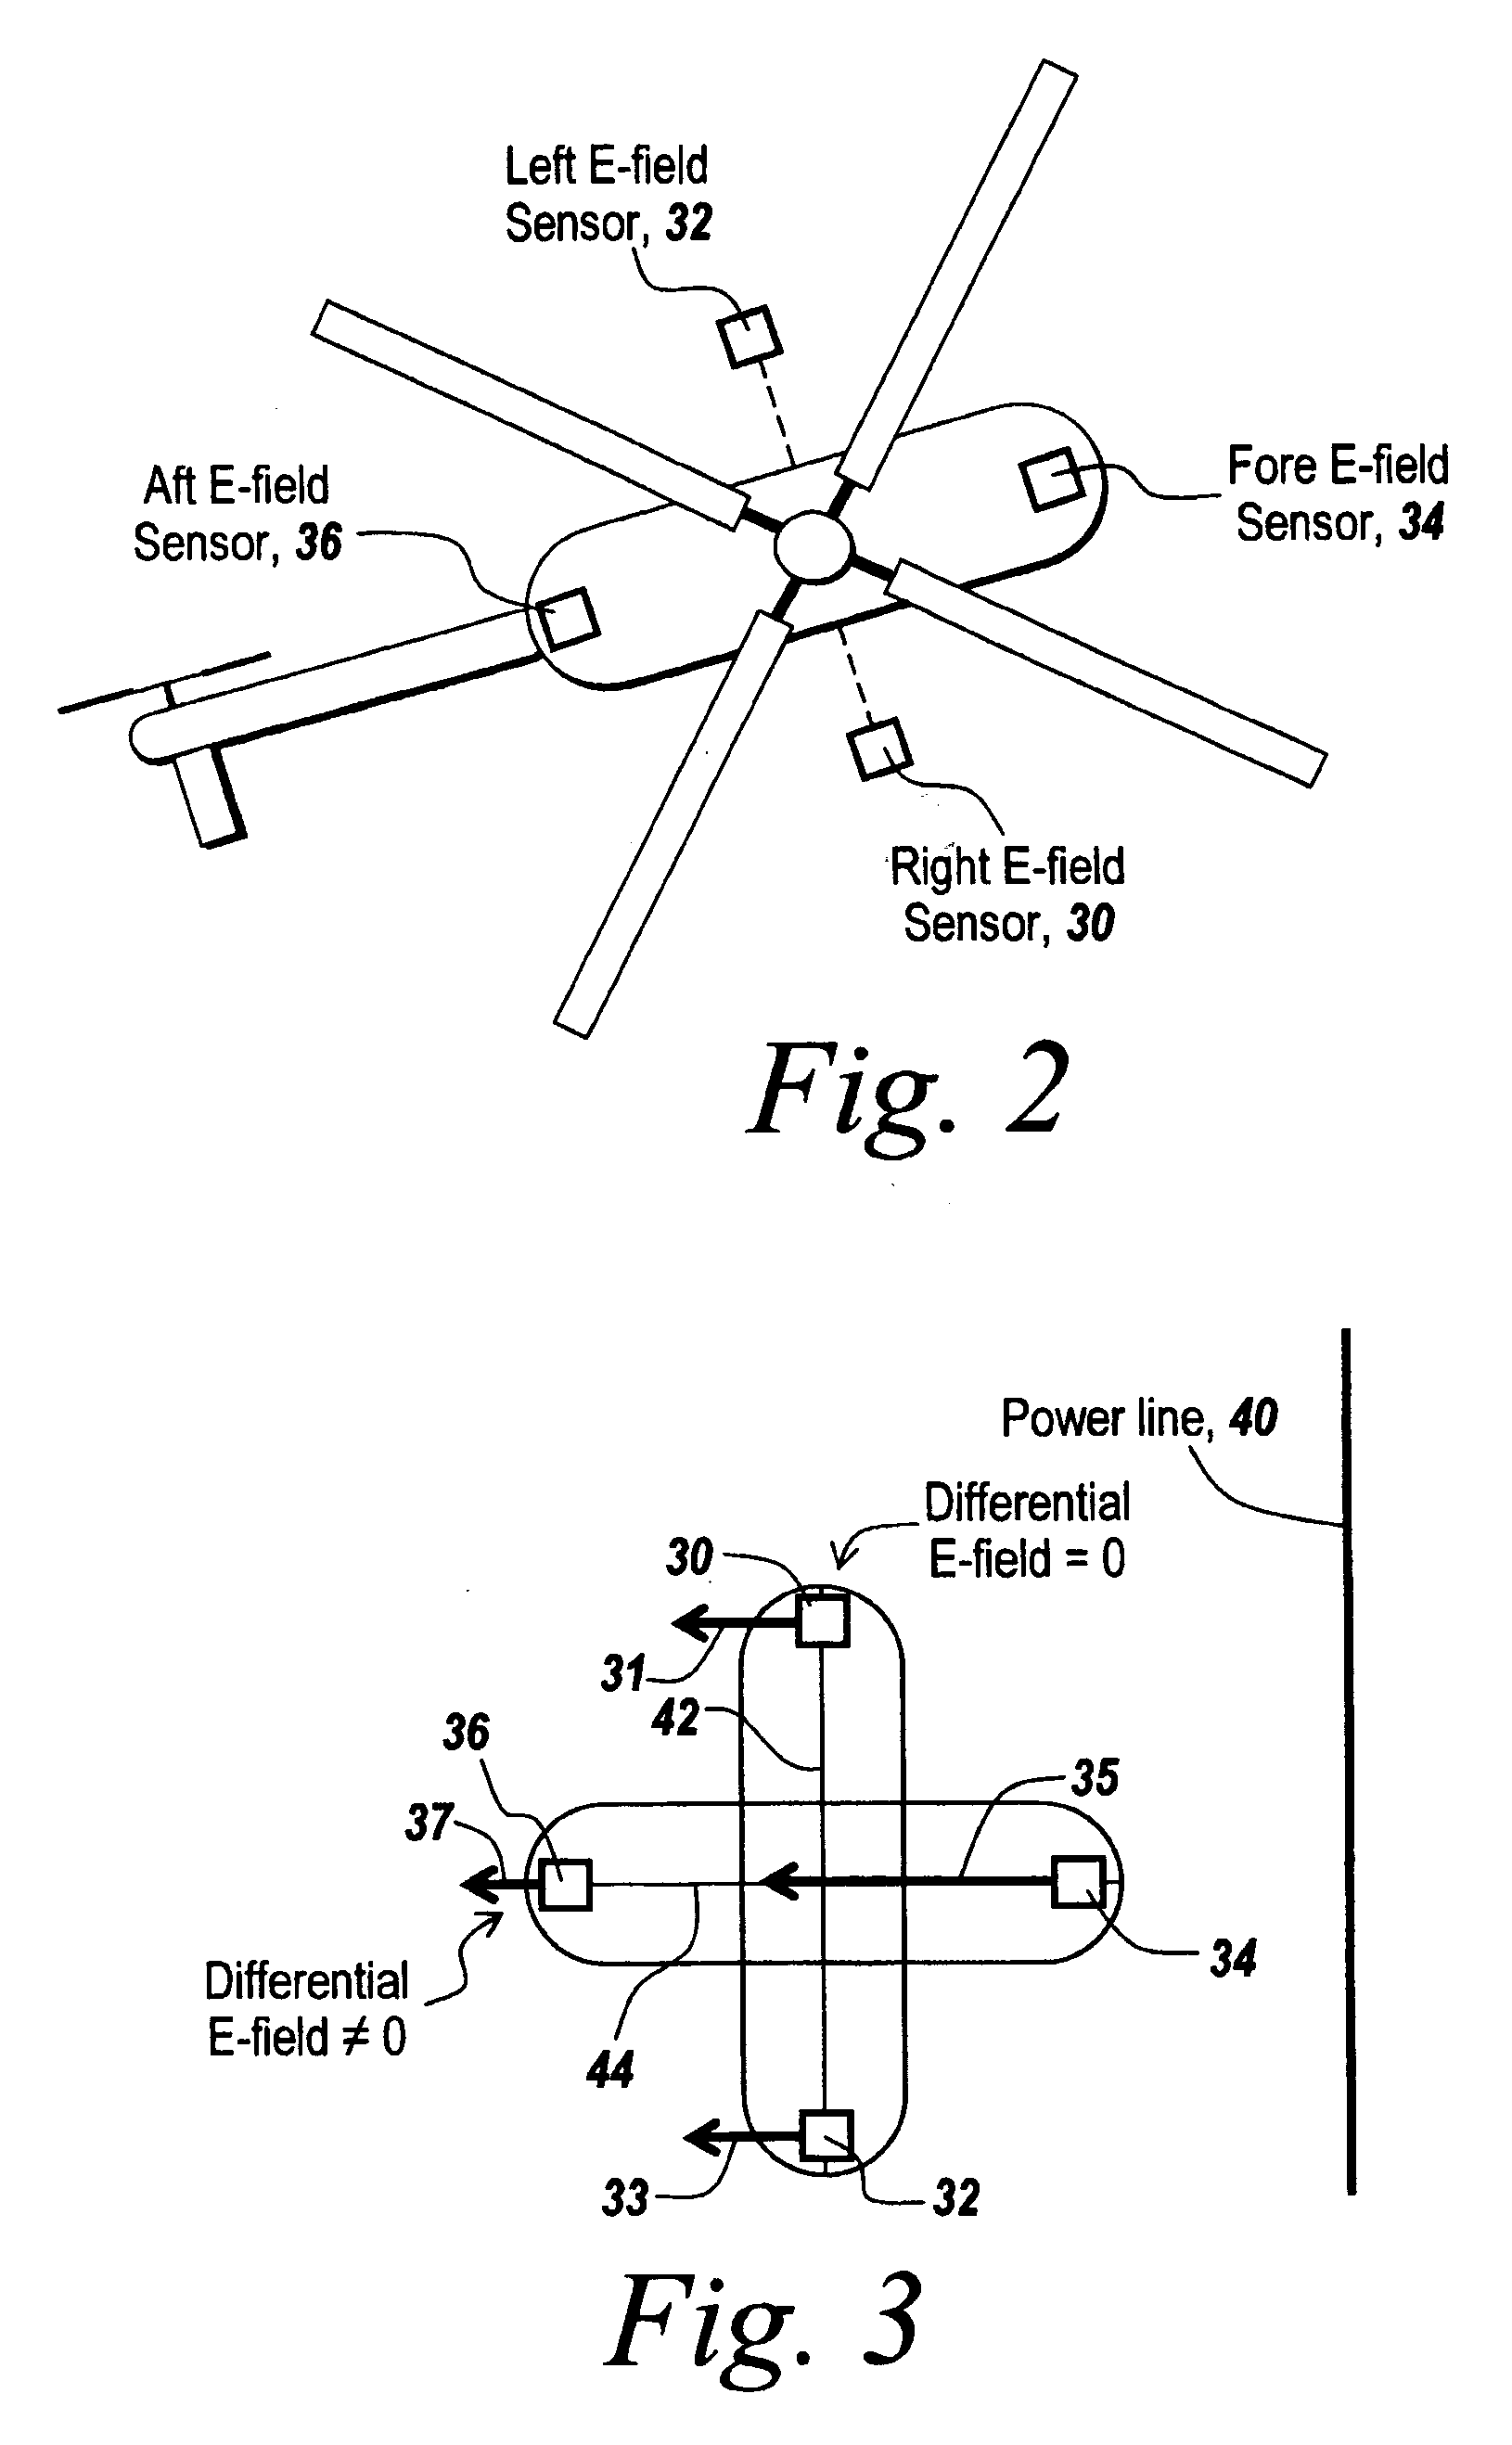 Method and apparatus for avoidance of power lines or trip wires by fixed and rotary winged aircraft